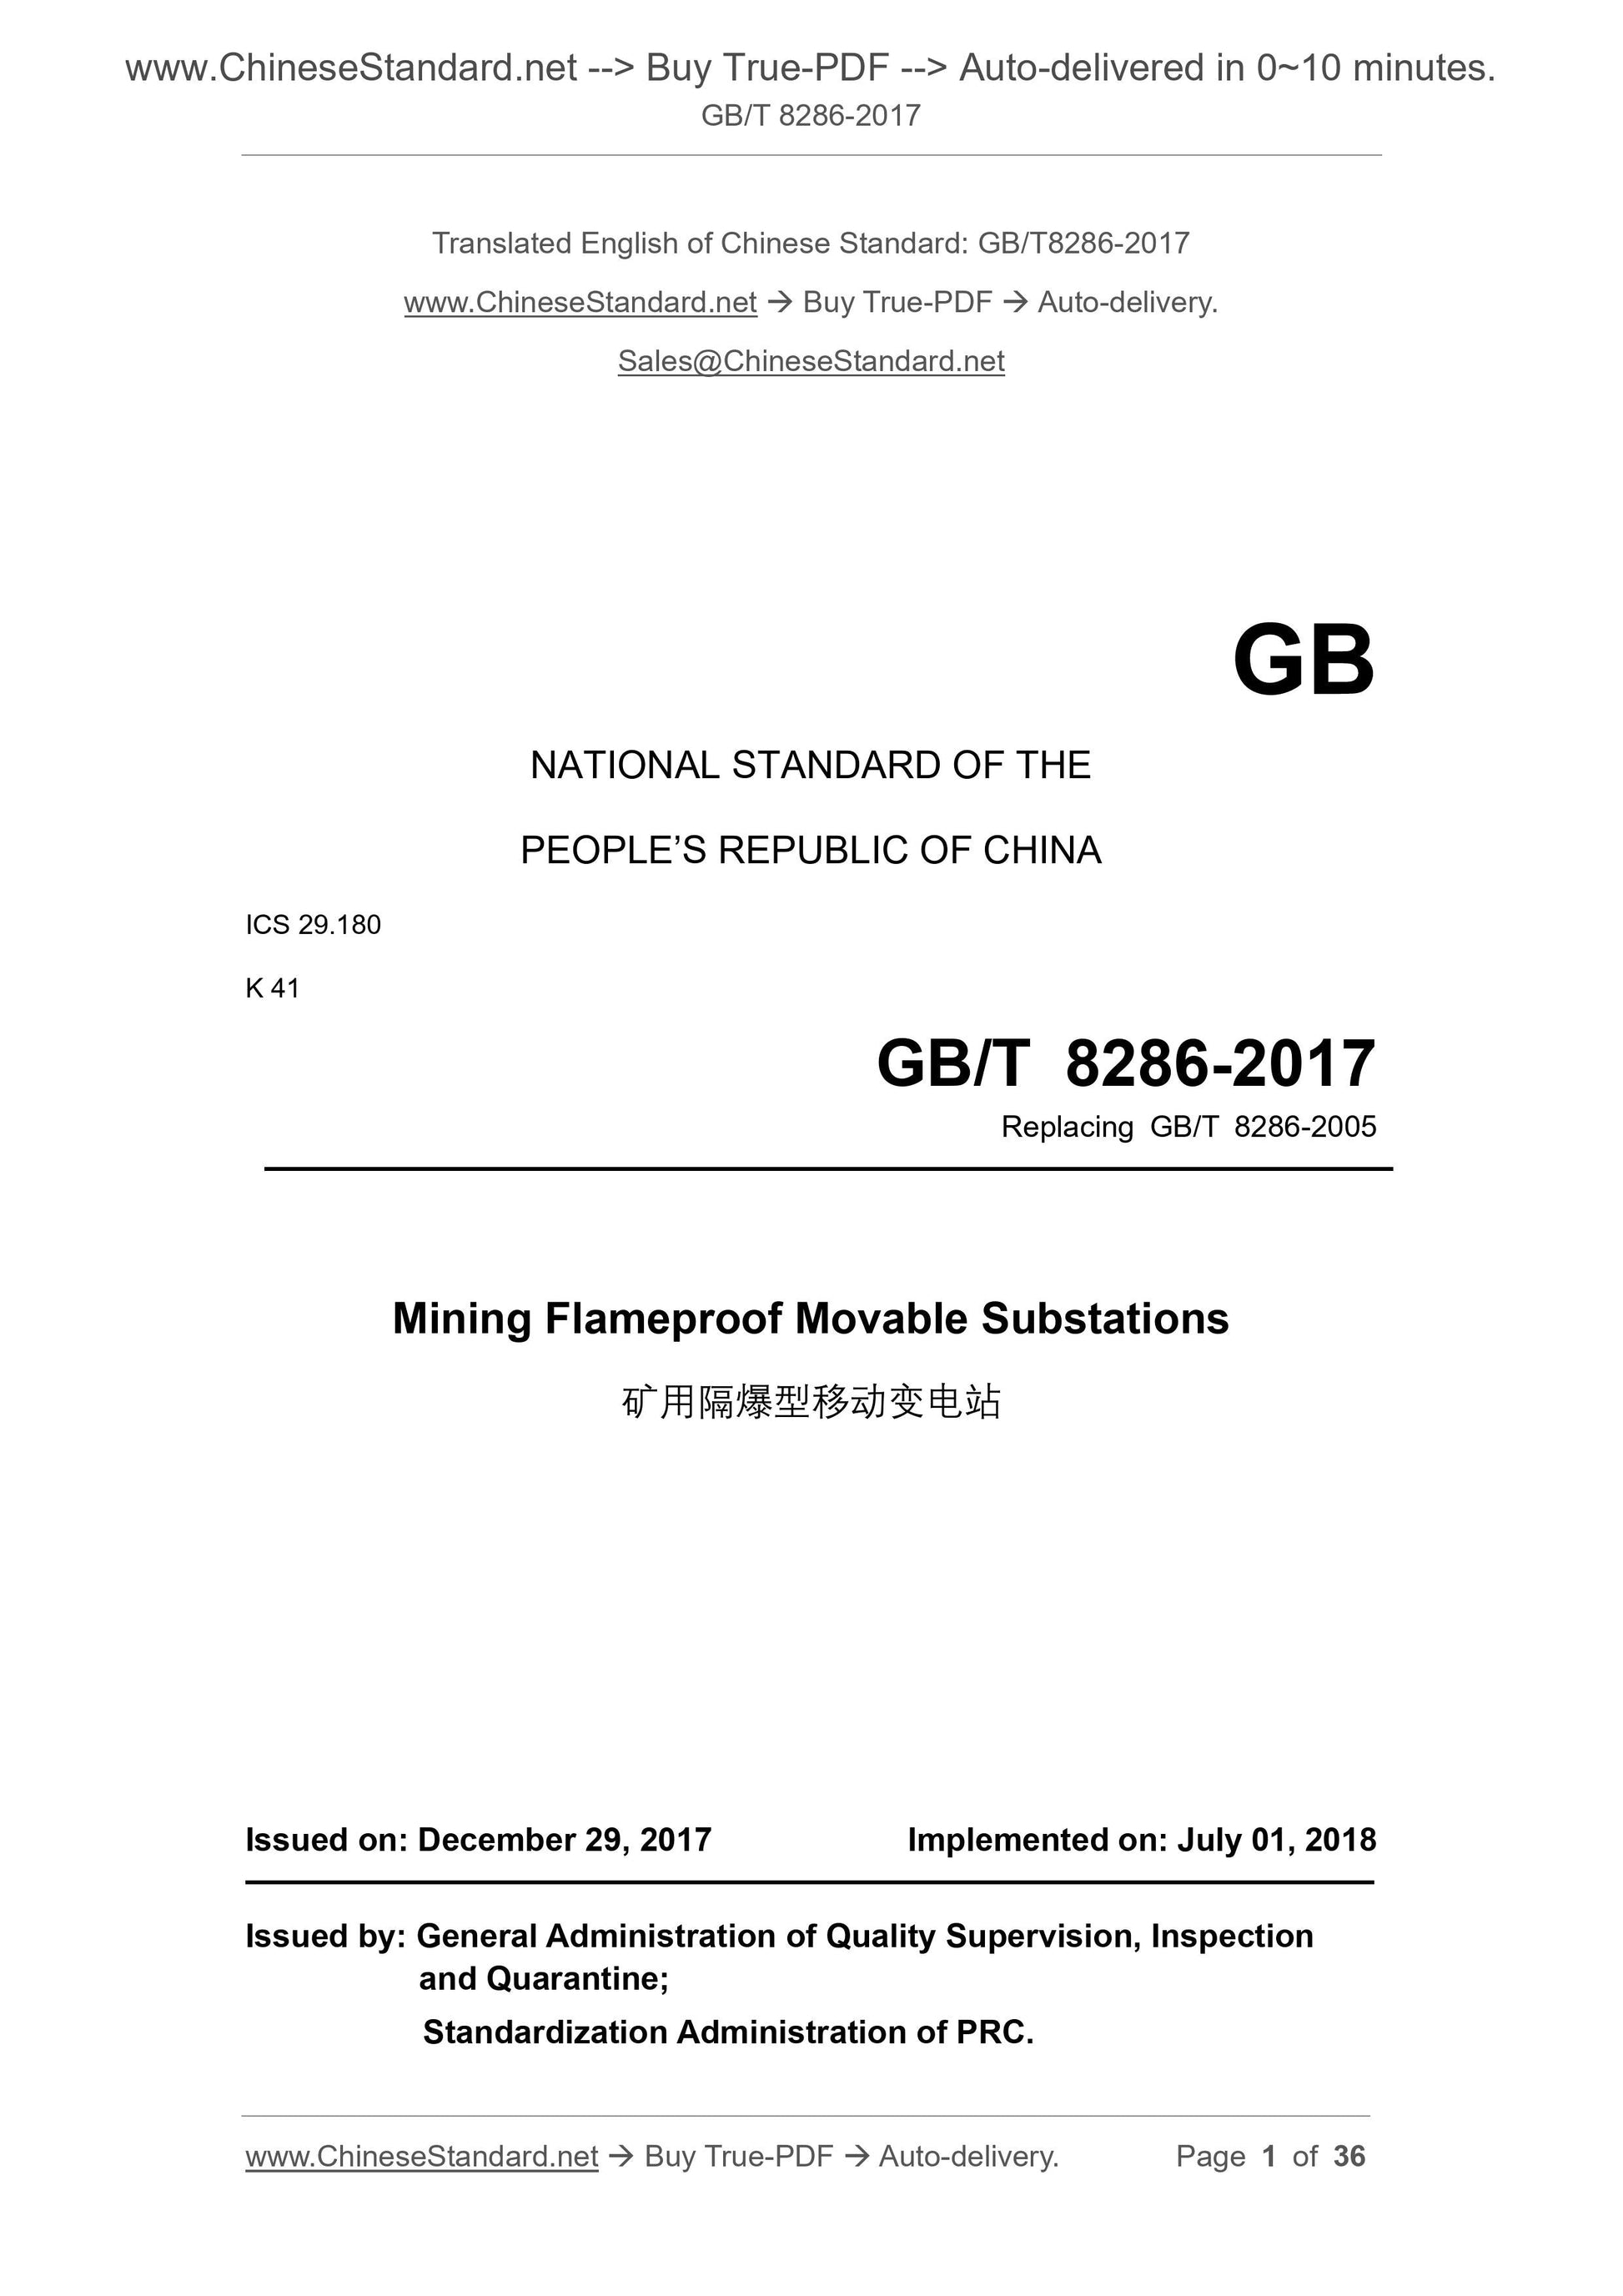 GB/T 8286-2017 Page 1